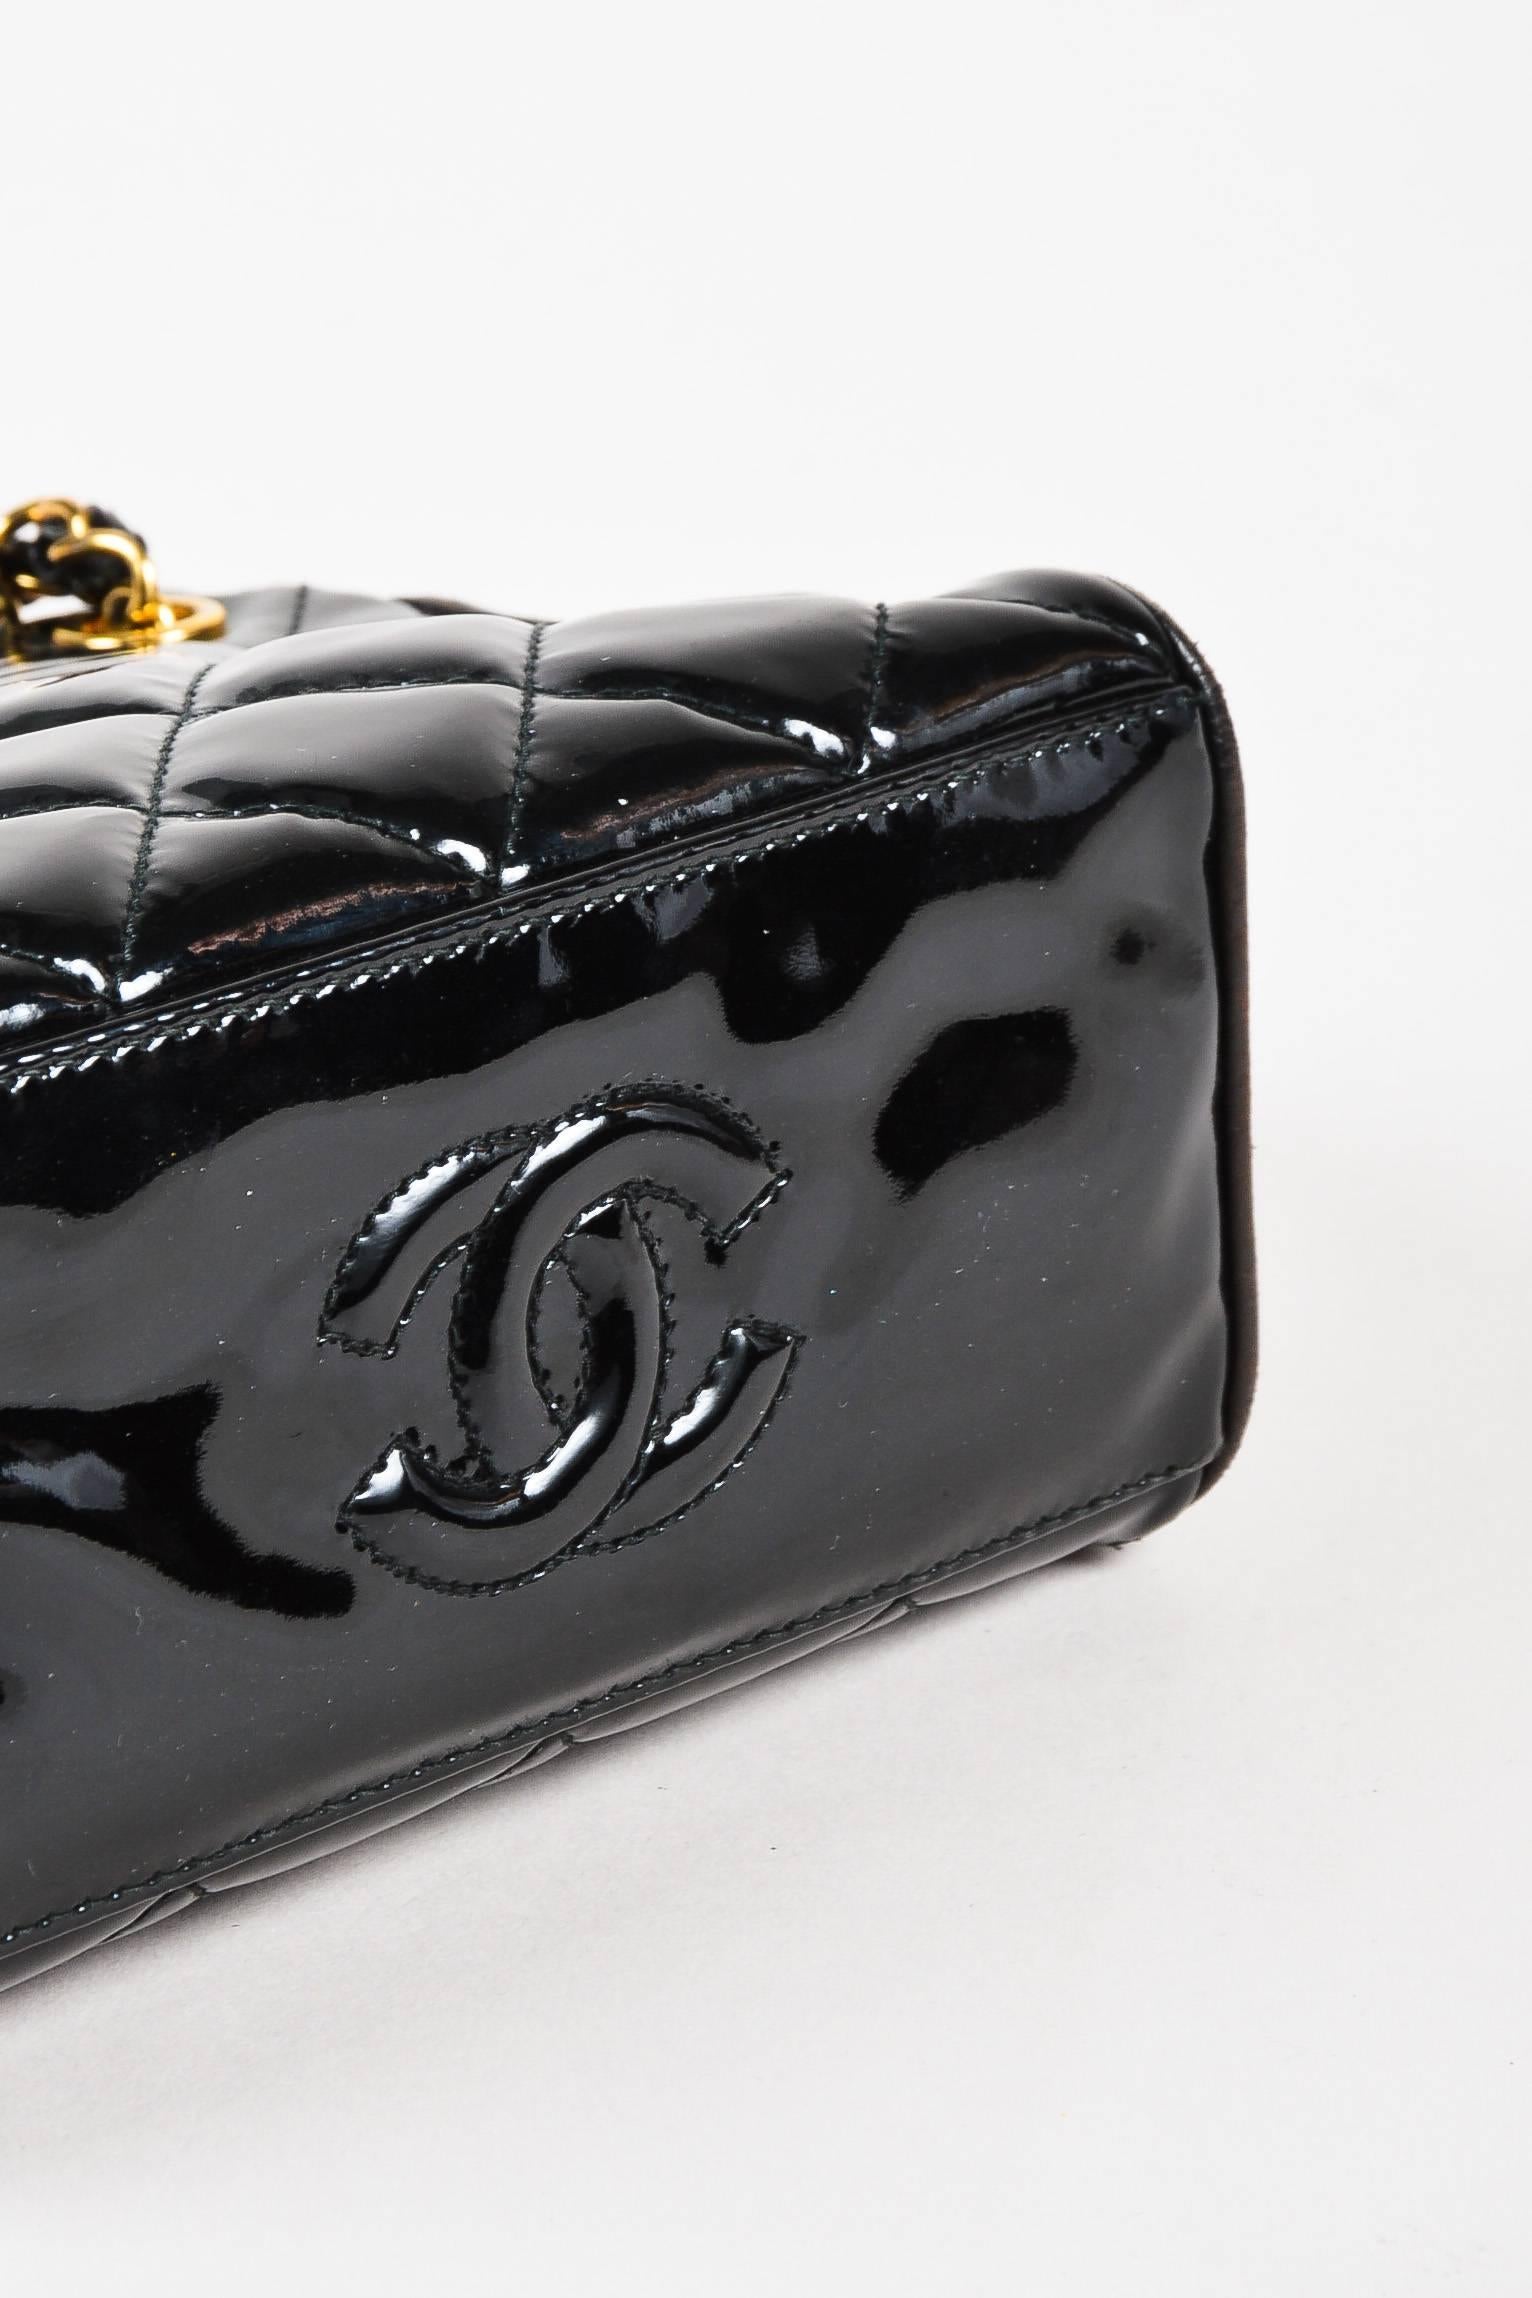 Vintage Chanel Black Patent Leather Quilted Gold Tone Chain Strap Shoulder Bag In Good Condition For Sale In Chicago, IL